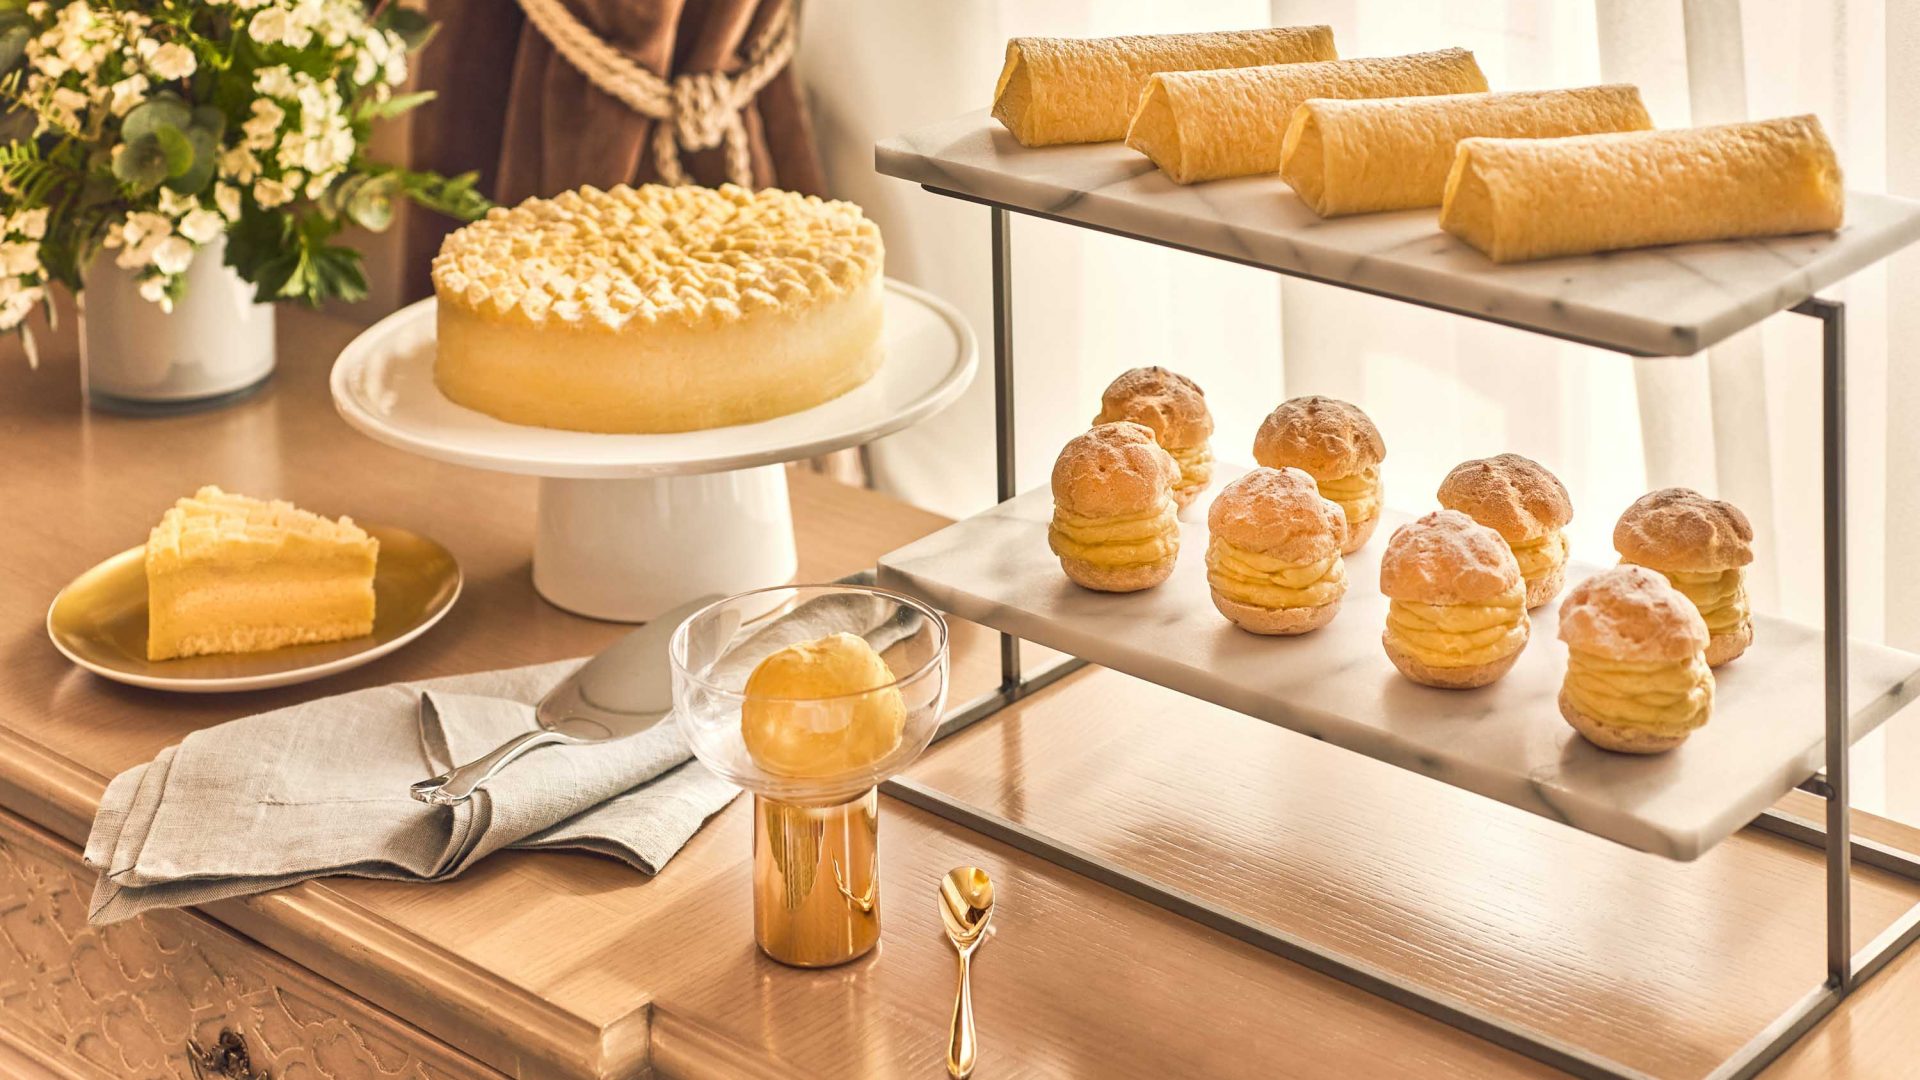 A cabinet displaying several durian pastries.